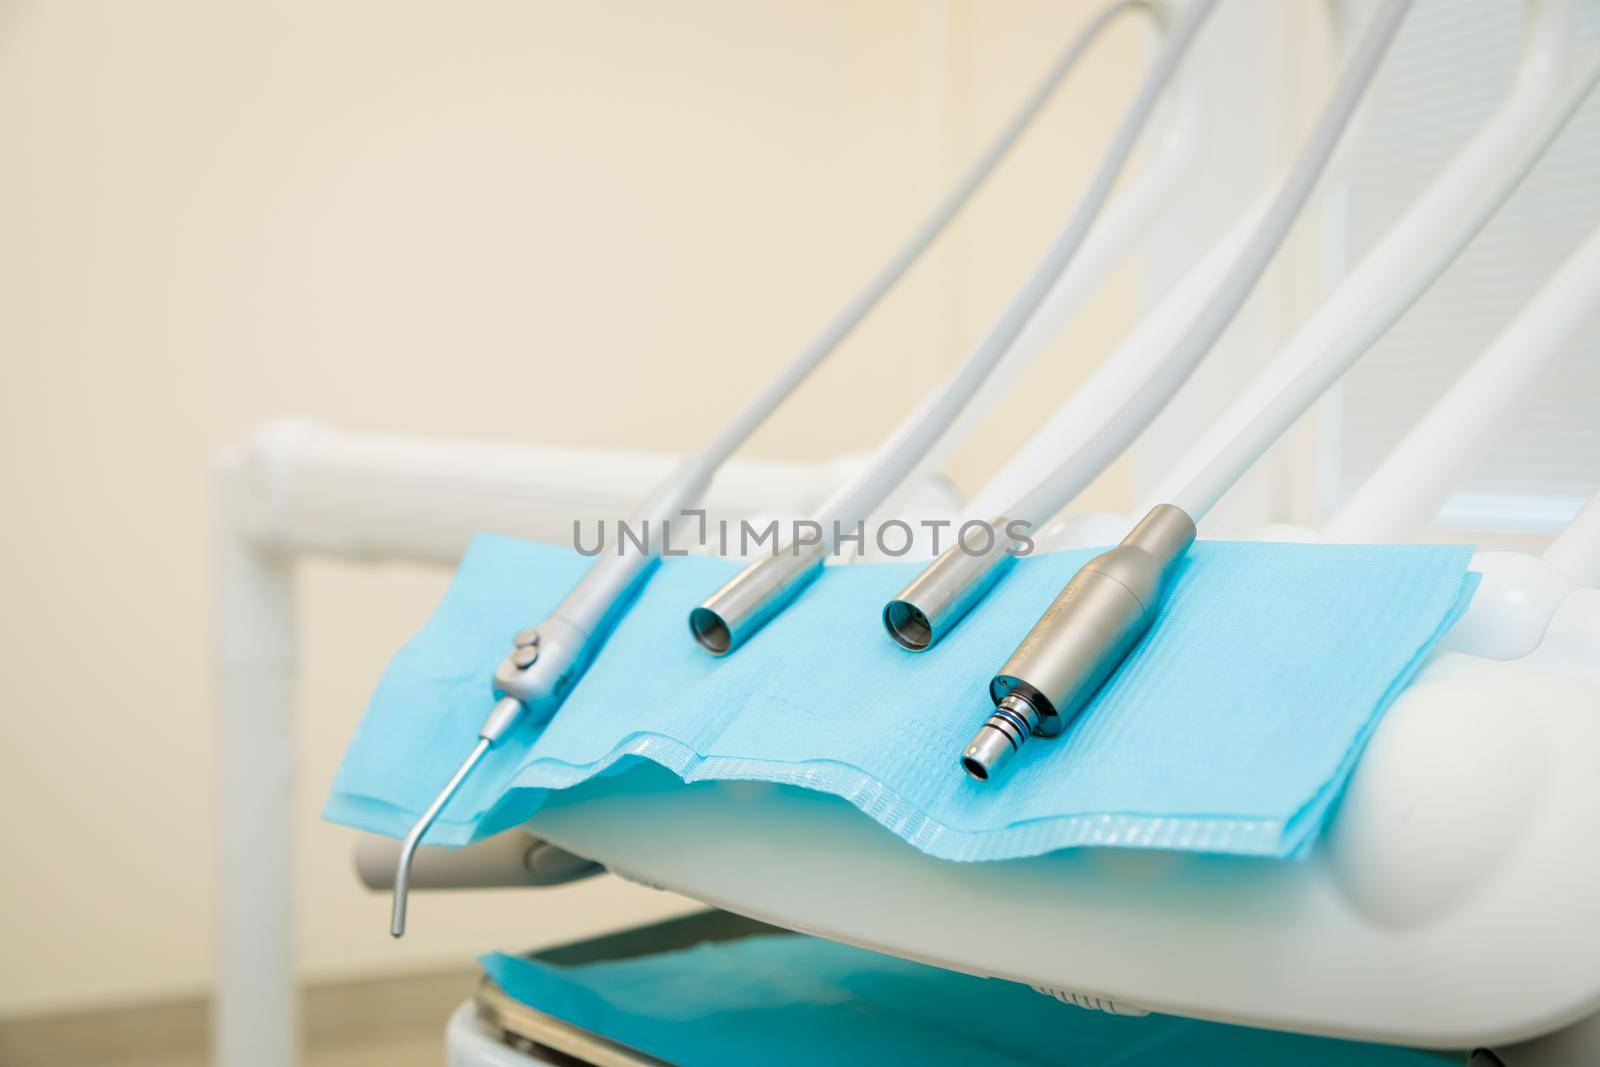 Medical equipment and devices in the dental office. Dental treatment and prosthetics.